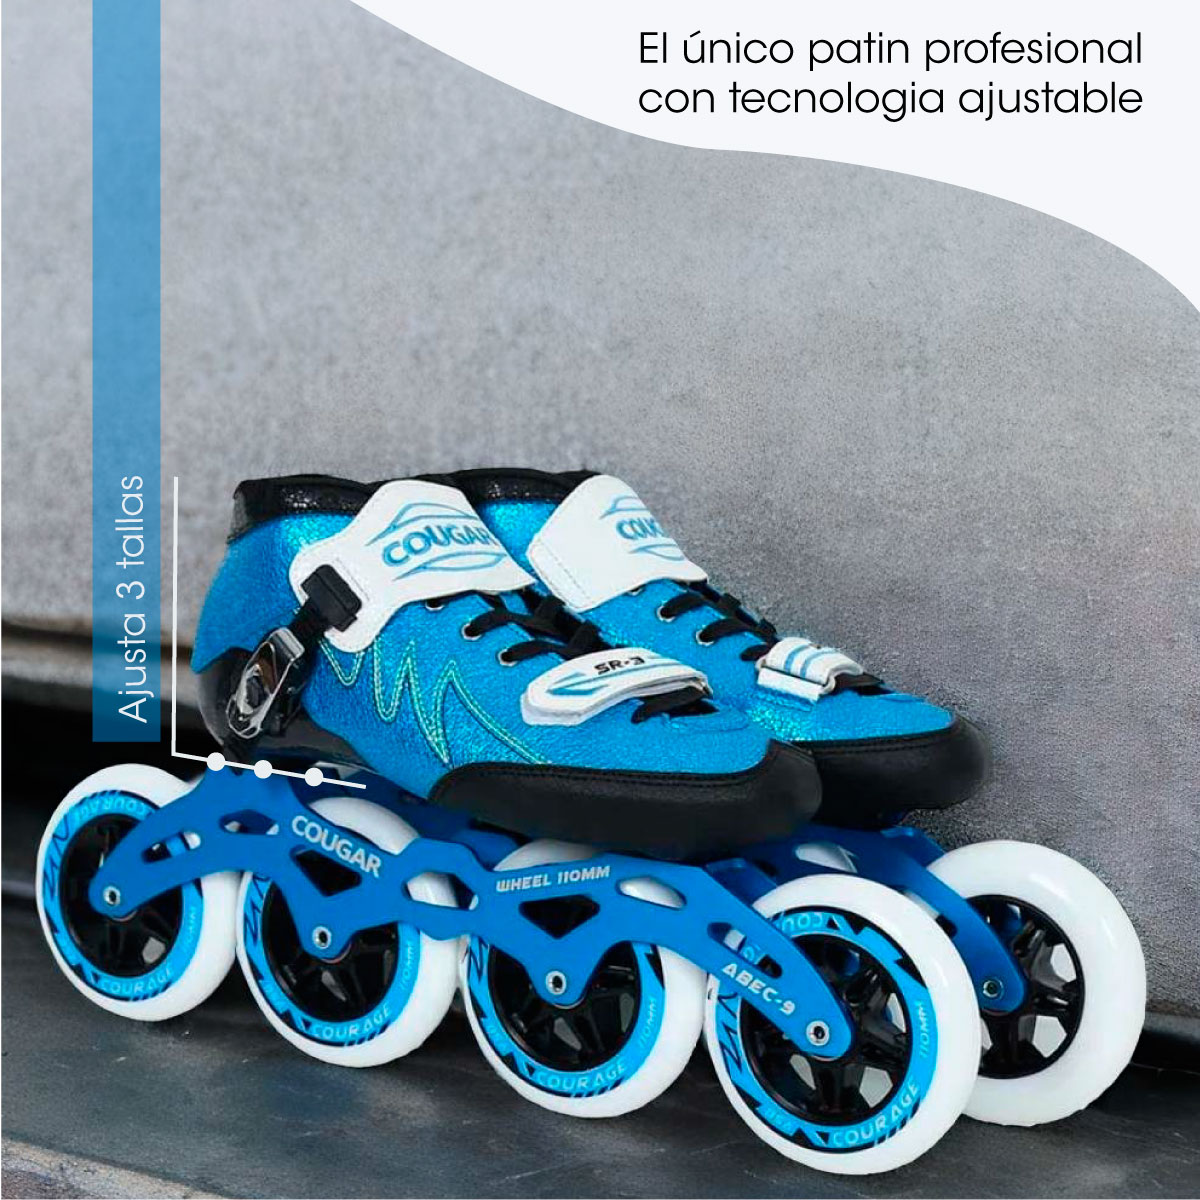 patines-ajustables-colombia